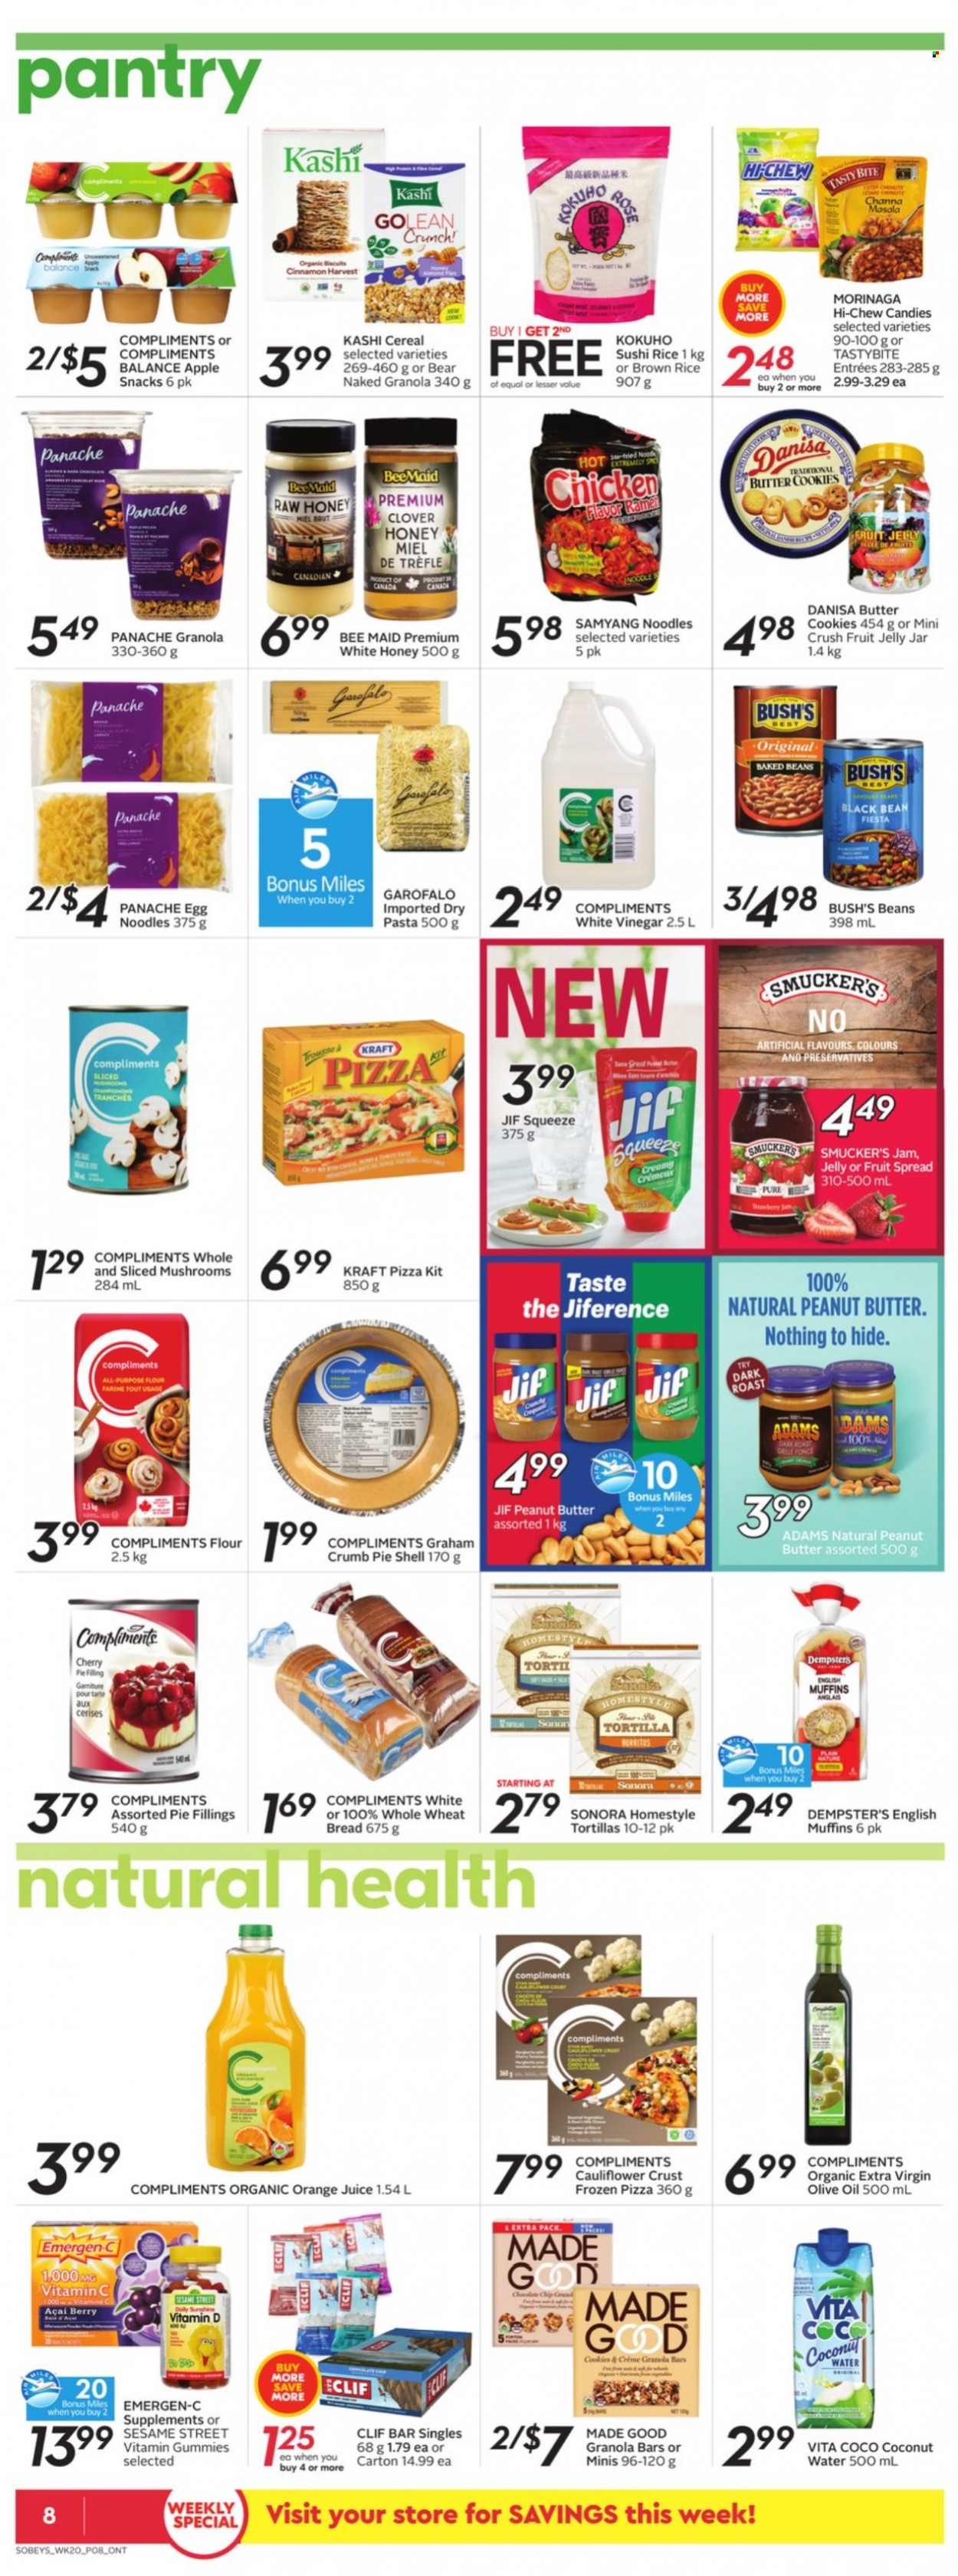 thumbnail - Sobeys Flyer - September 09, 2021 - September 15, 2021 - Sales products - english muffins, tortillas, wheat bread, pie, cherry pie, beans, pizza, pasta, burrito, noodles, Kraft®, cookies, butter cookies, snack, jelly, Sesame Street, baked beans, cereals, granola bar, brown rice, rice, egg noodles, cinnamon, extra virgin olive oil, vinegar, olive oil, oil, honey, fruit jam, peanut butter, Jif, orange juice, juice, coconut water, wine, rosé wine, vitamin c, Emergen-C. Page 9.